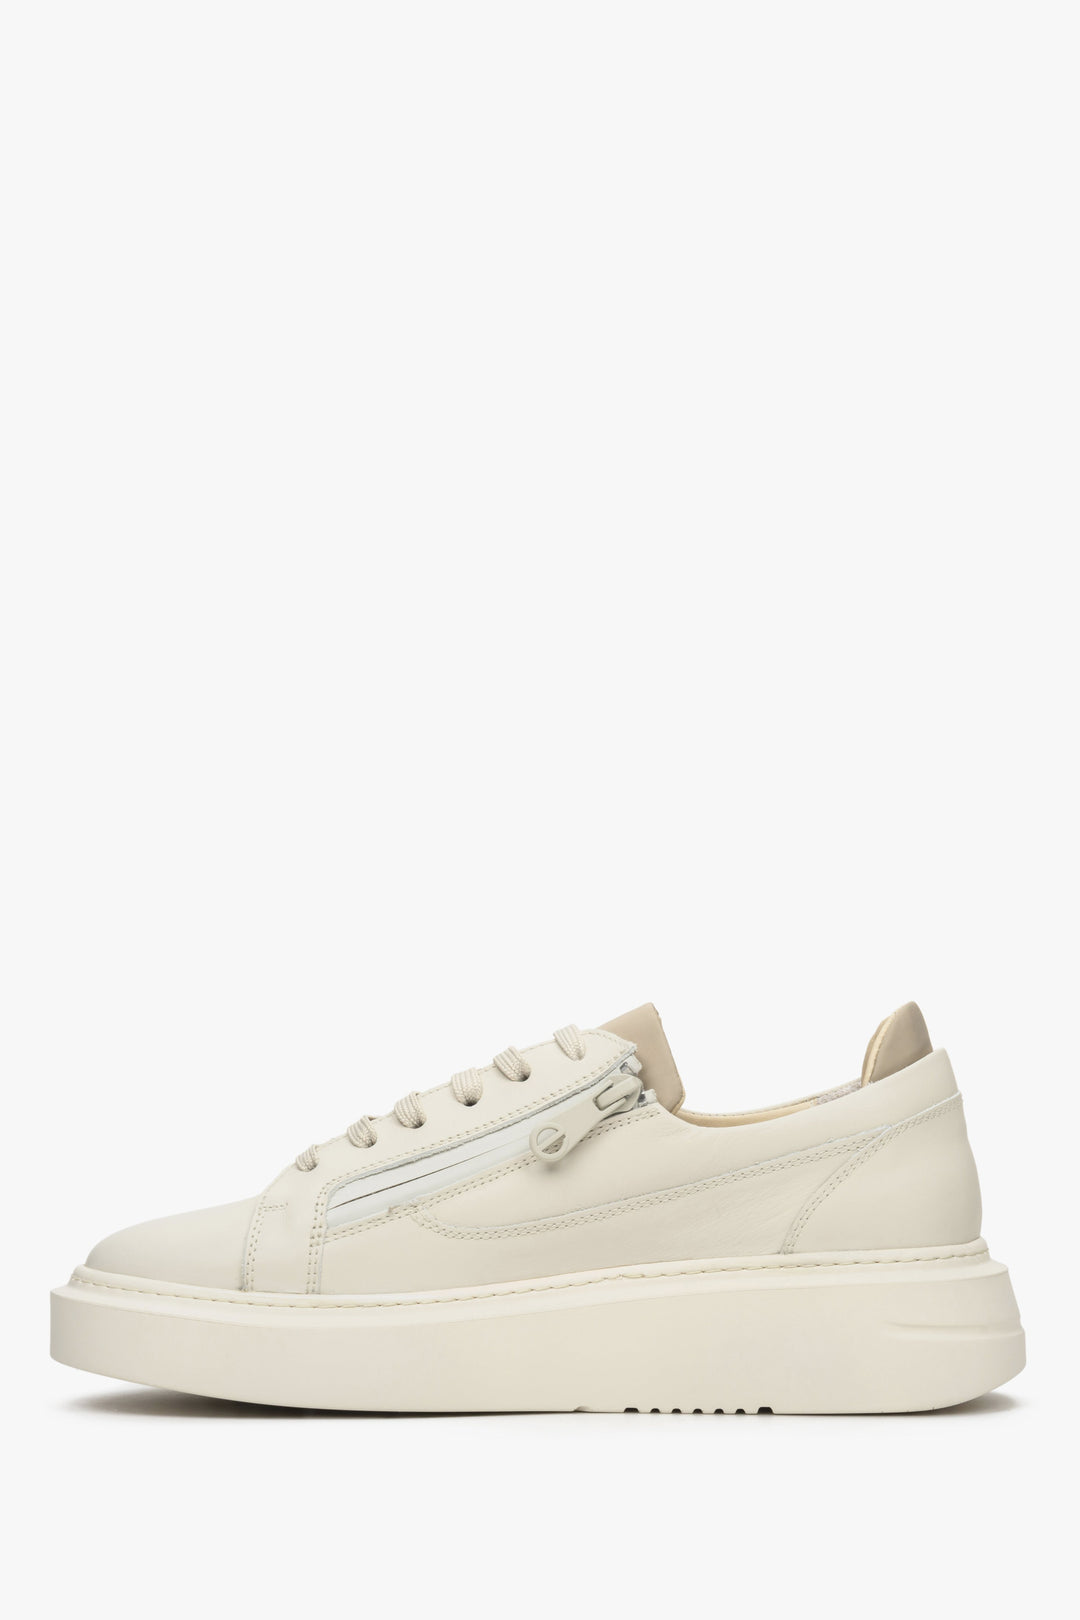 Women's beige leather  sneakers by Estro with a decorative zipper for spring - shoe profile.